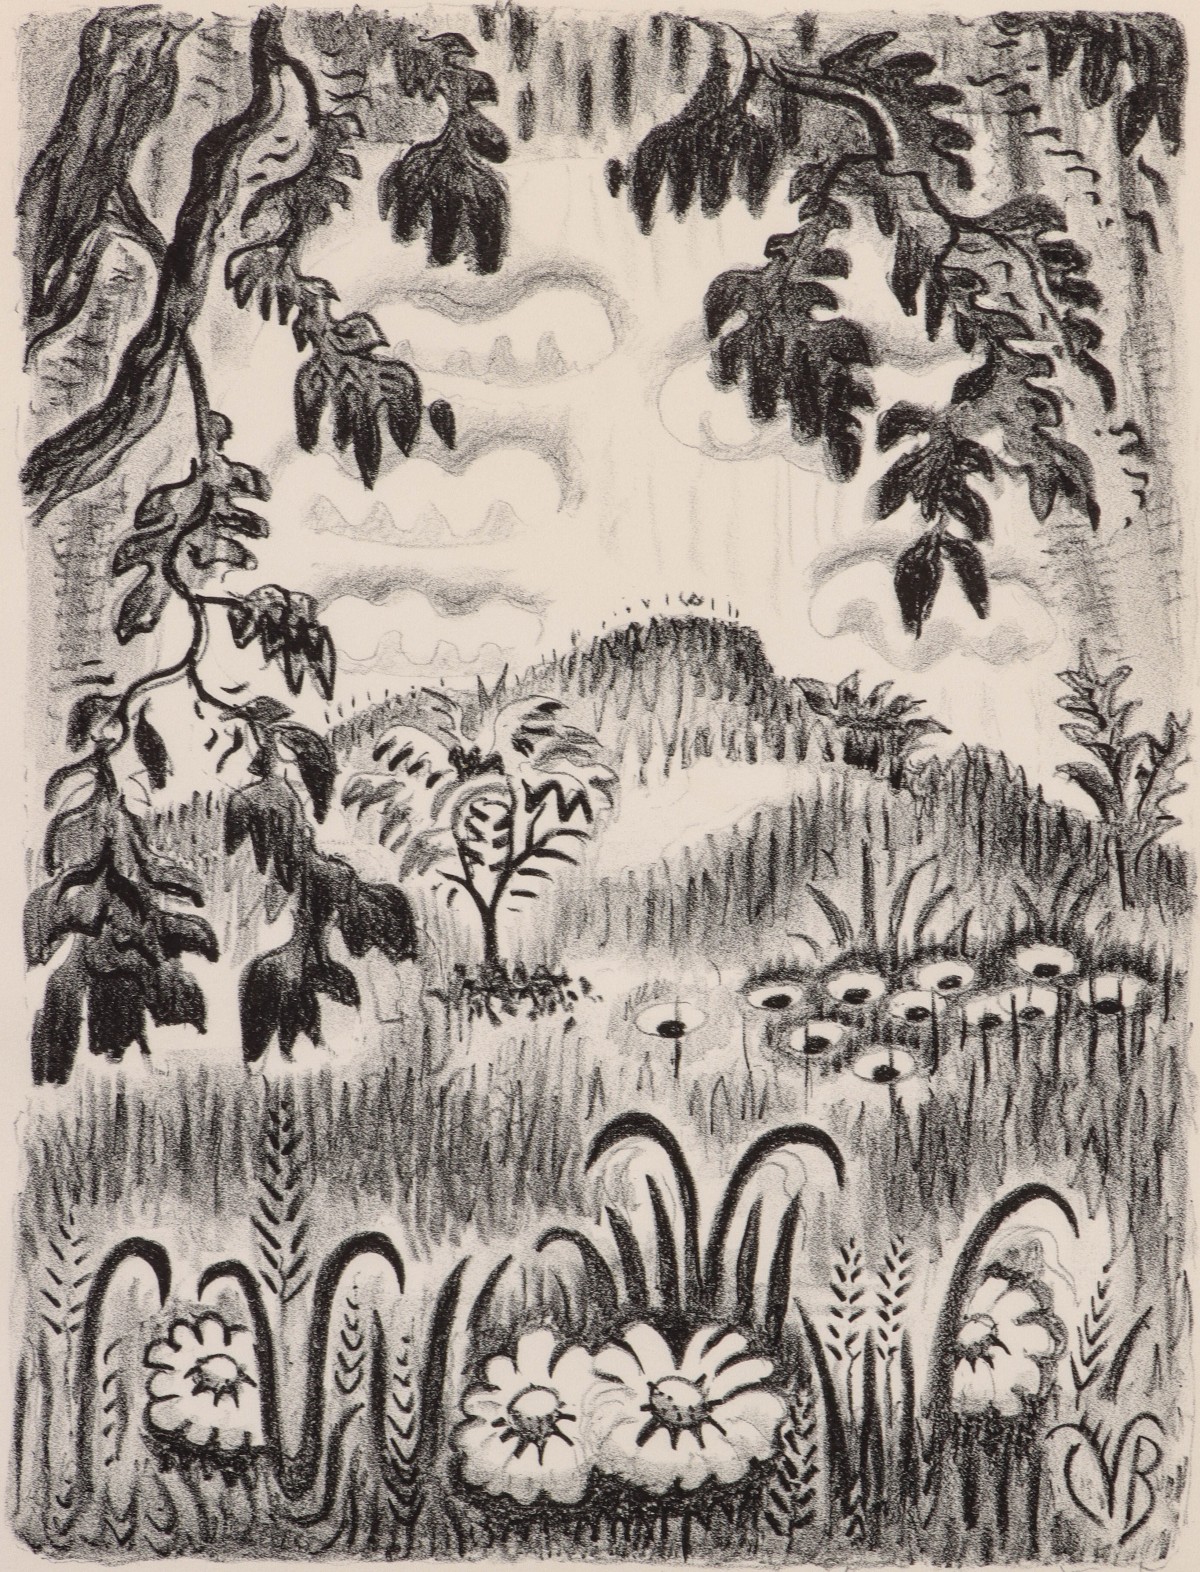 CHARLES BURCHFIELD (1893-1967) PENCIL SIGNED LITHO